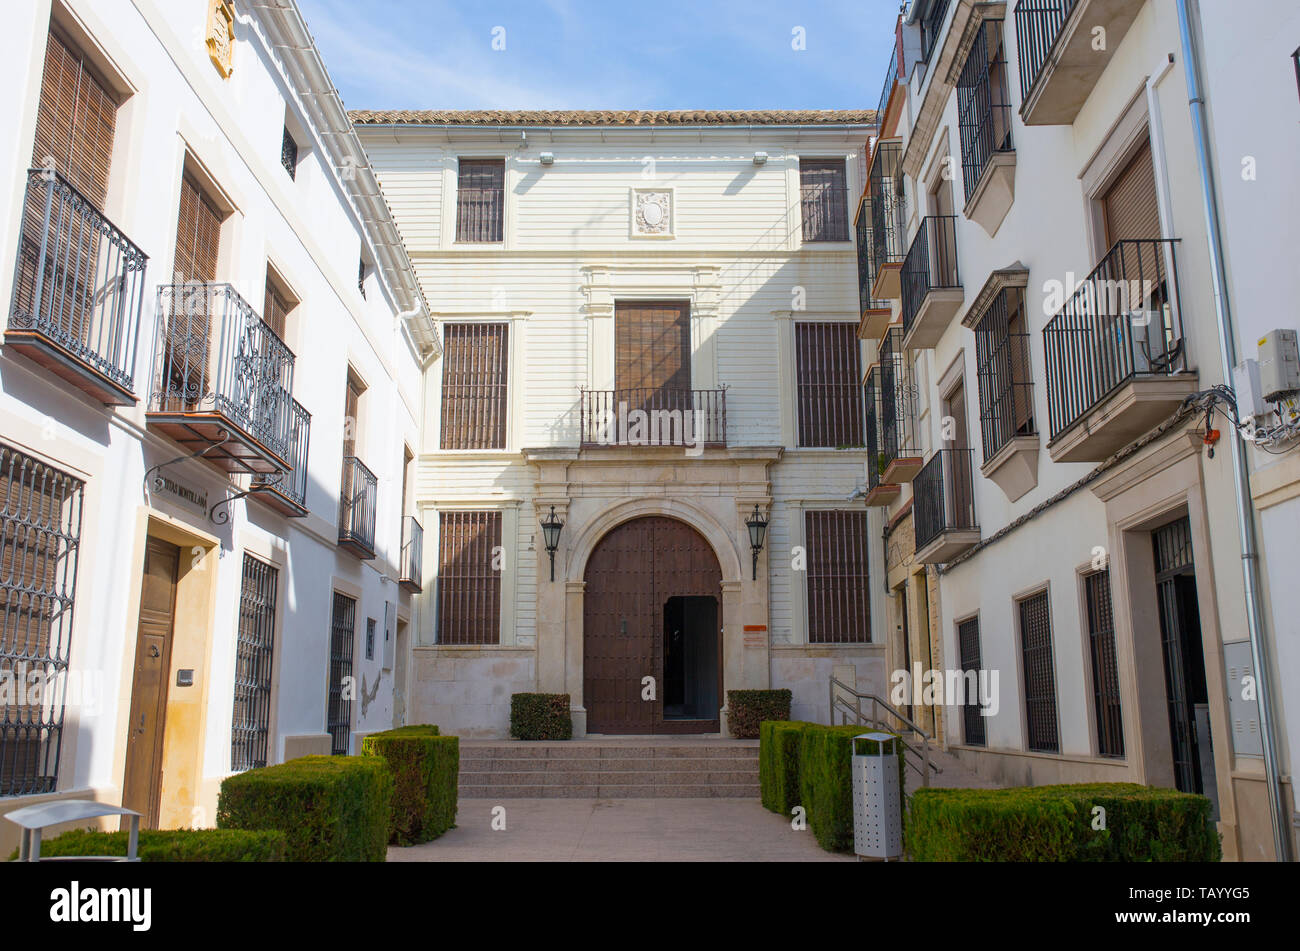 Montilla, Spain - March 2nd, 2019: Garnelo Museum outdoors. It exhibits the biggest collection of paintings by Jose Garnelo painter. Cordoba, Spain Stock Photo